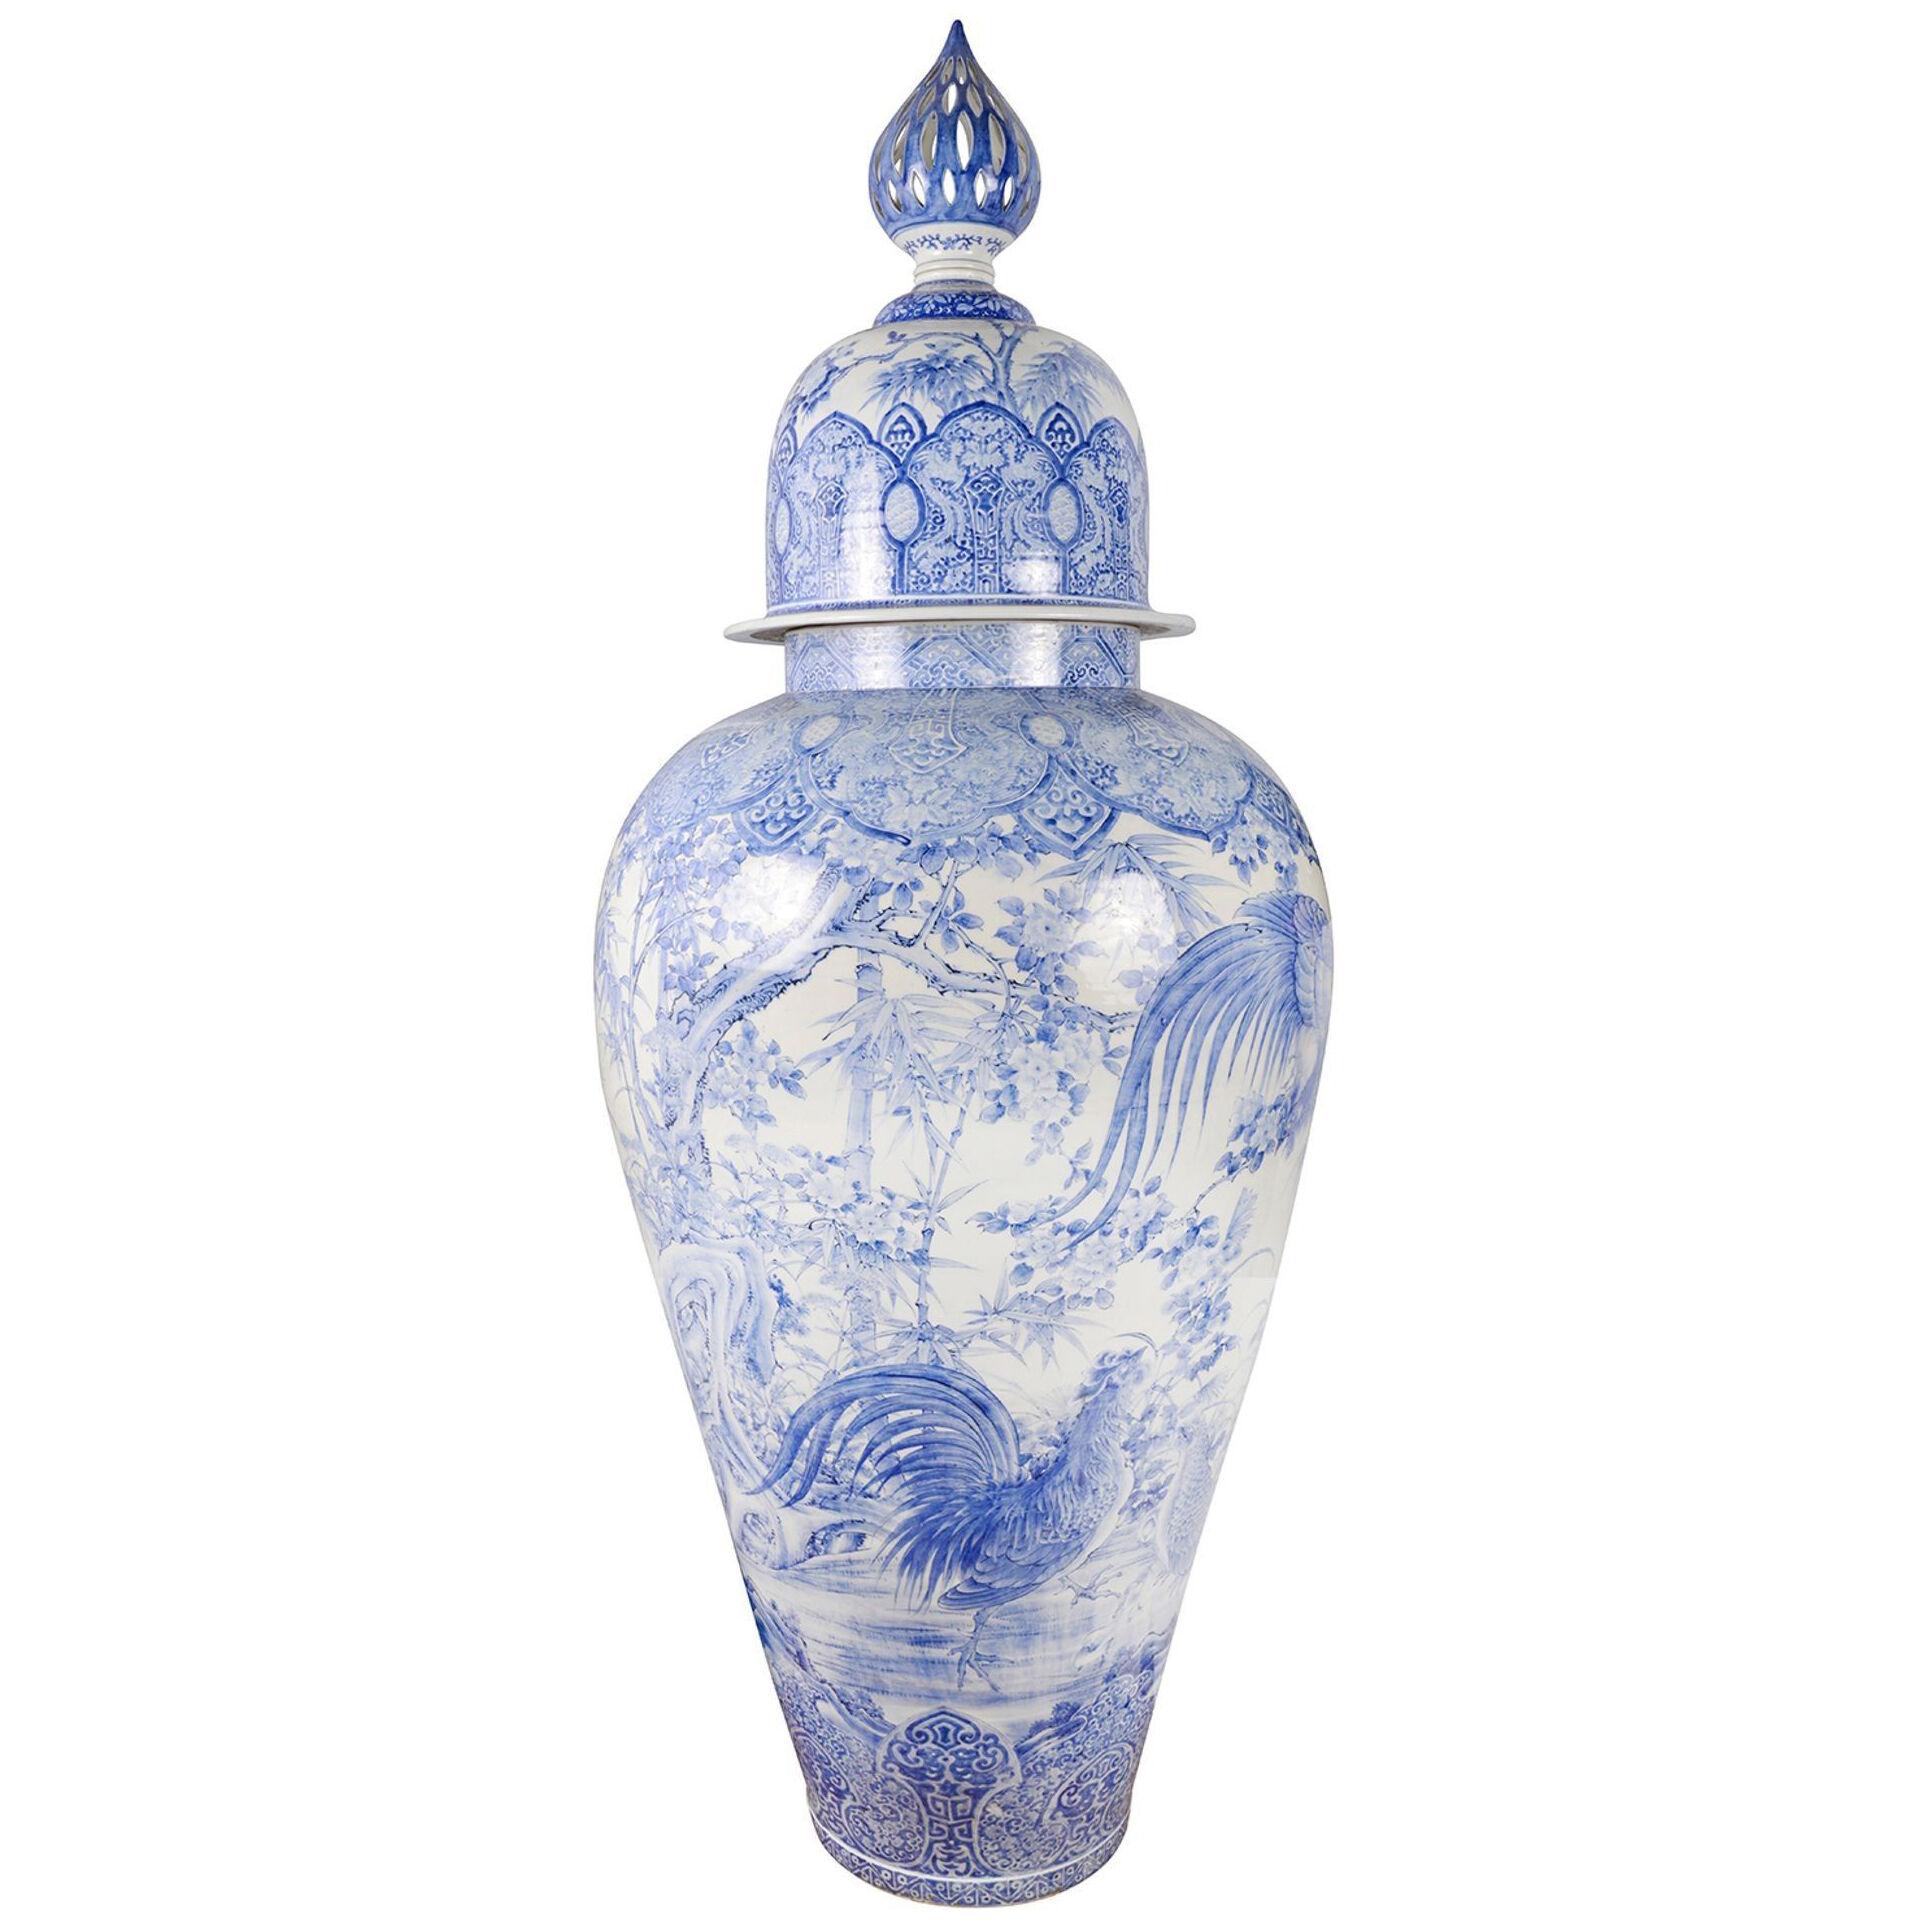 A MONUMENTAL 19TH CENTURY JAPANESE BLUE AND WHITE LIDDED PALACE VASE.